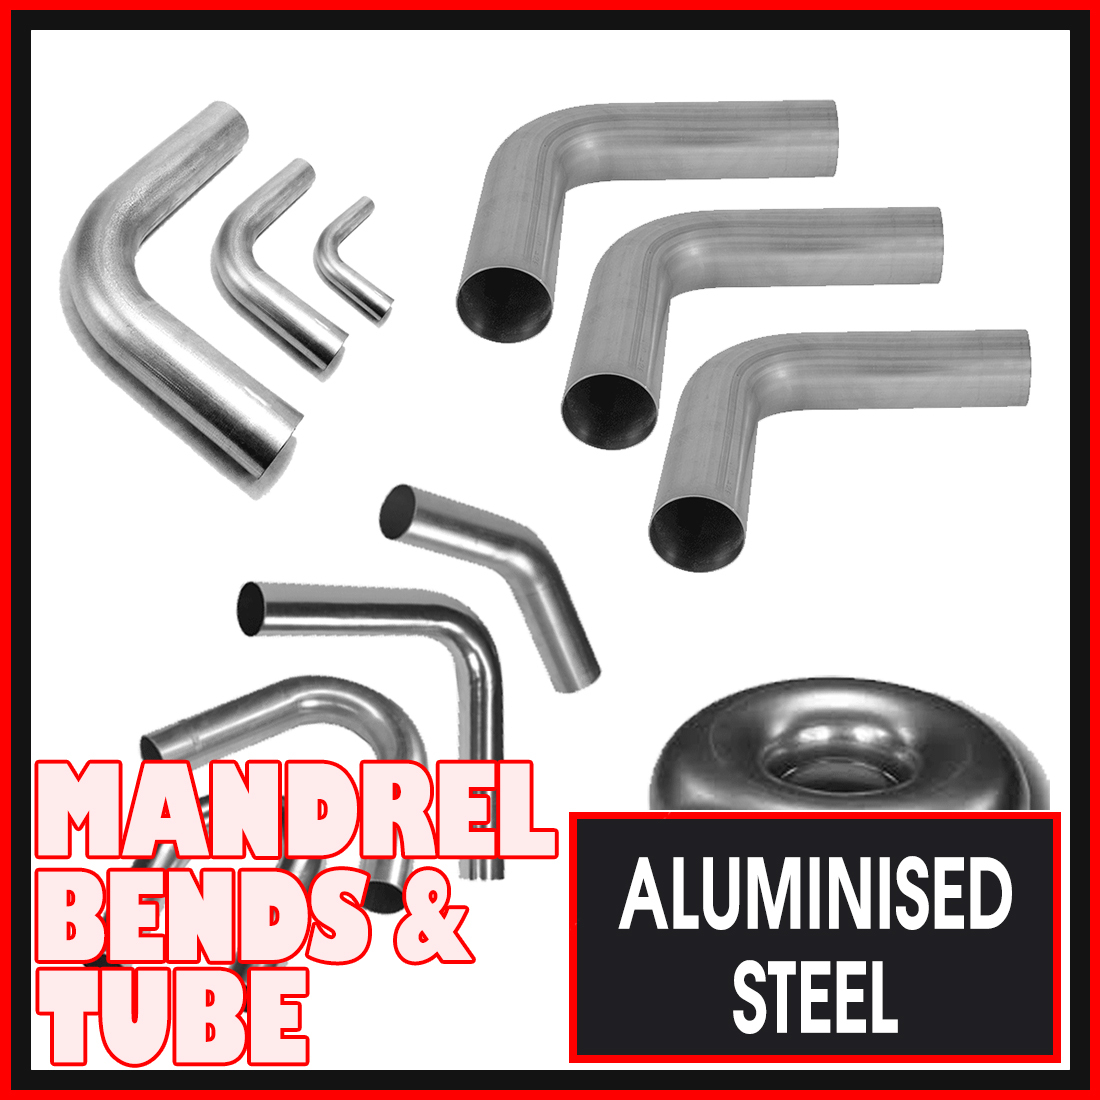 1 7/8" Aluminised Mild Steel Mandrel Bends and Exhaust Pipe image